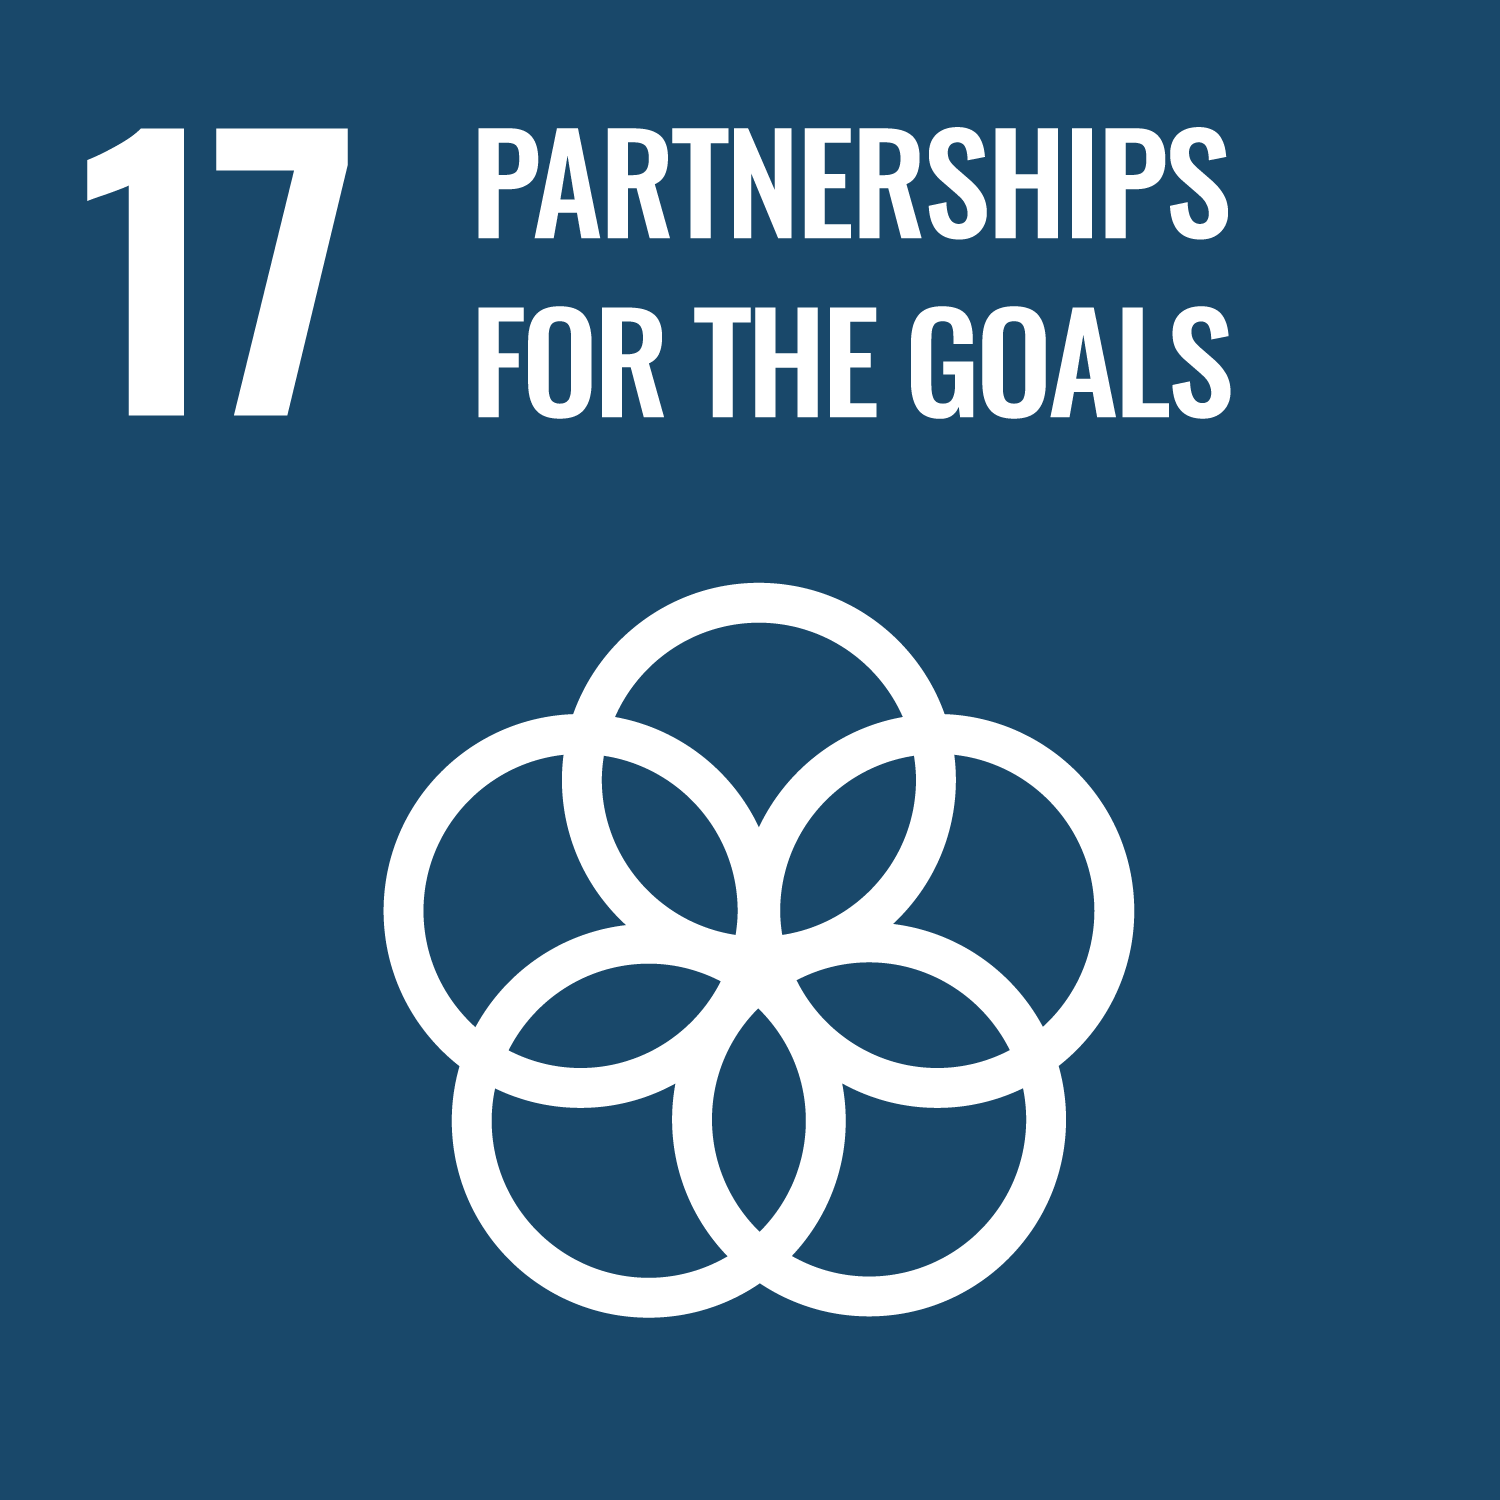 SDG 17 Graphic: Partnership for the Goals